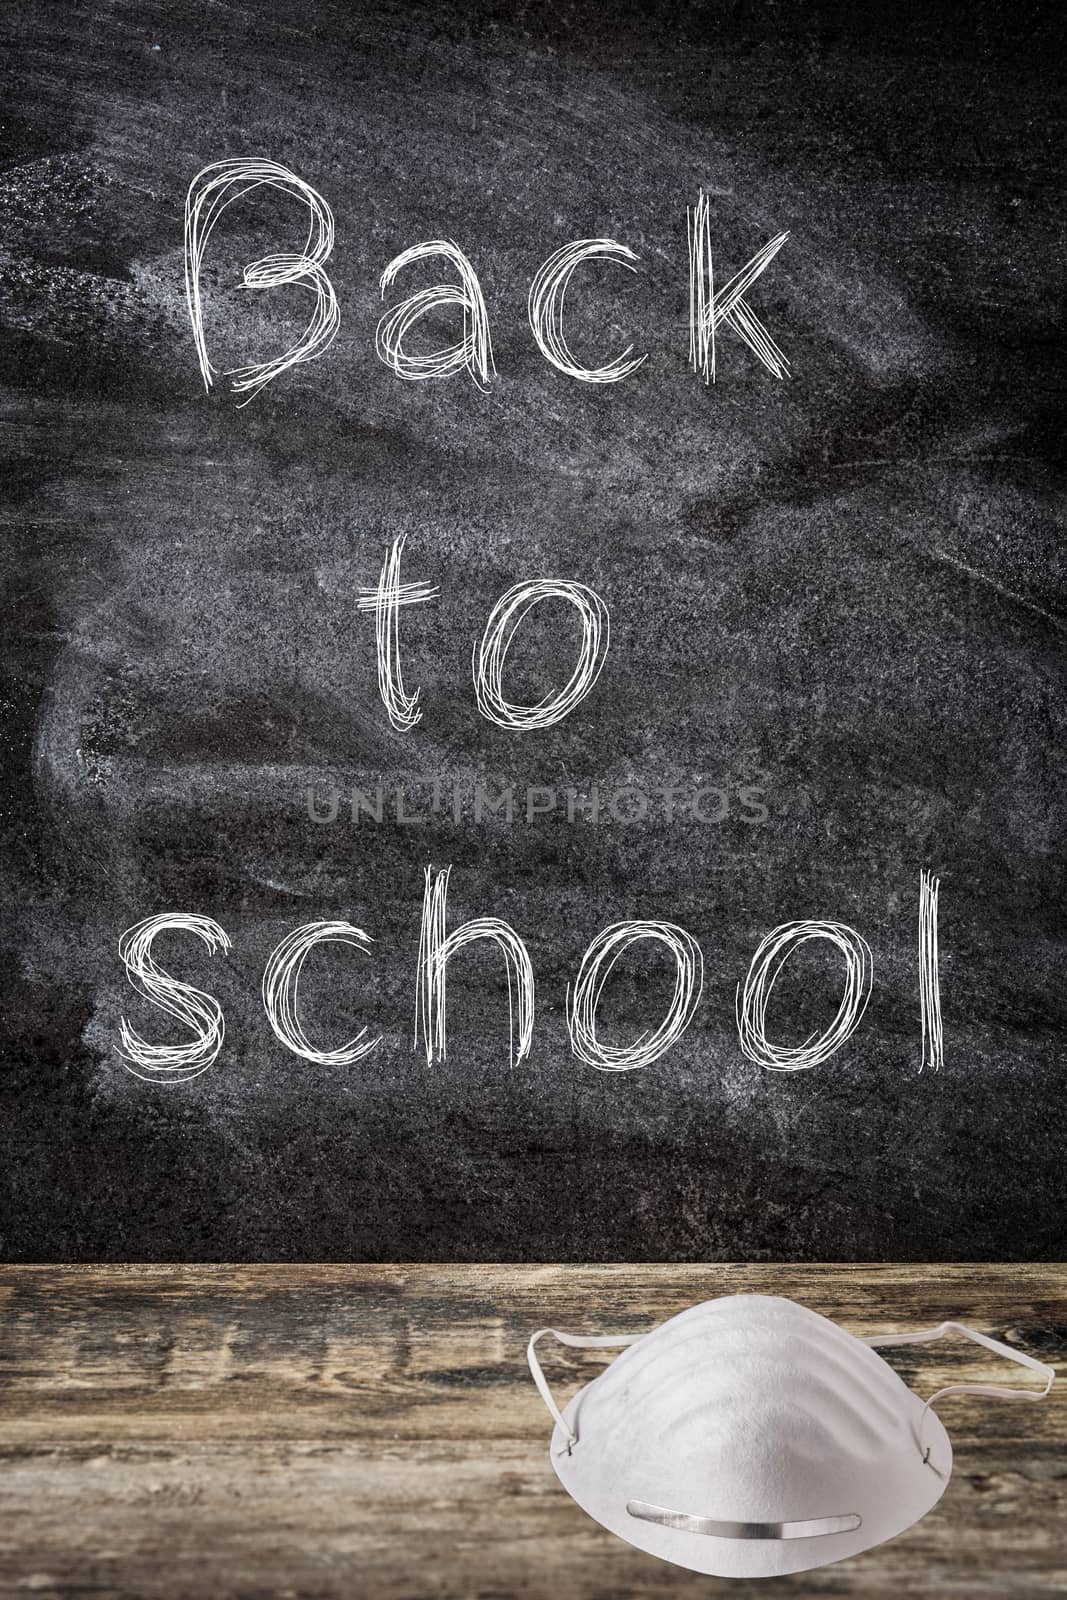 Blackboard with "back to school" message and protective face mask on wooden table.Back to school and coronavirus COVID-19 concept